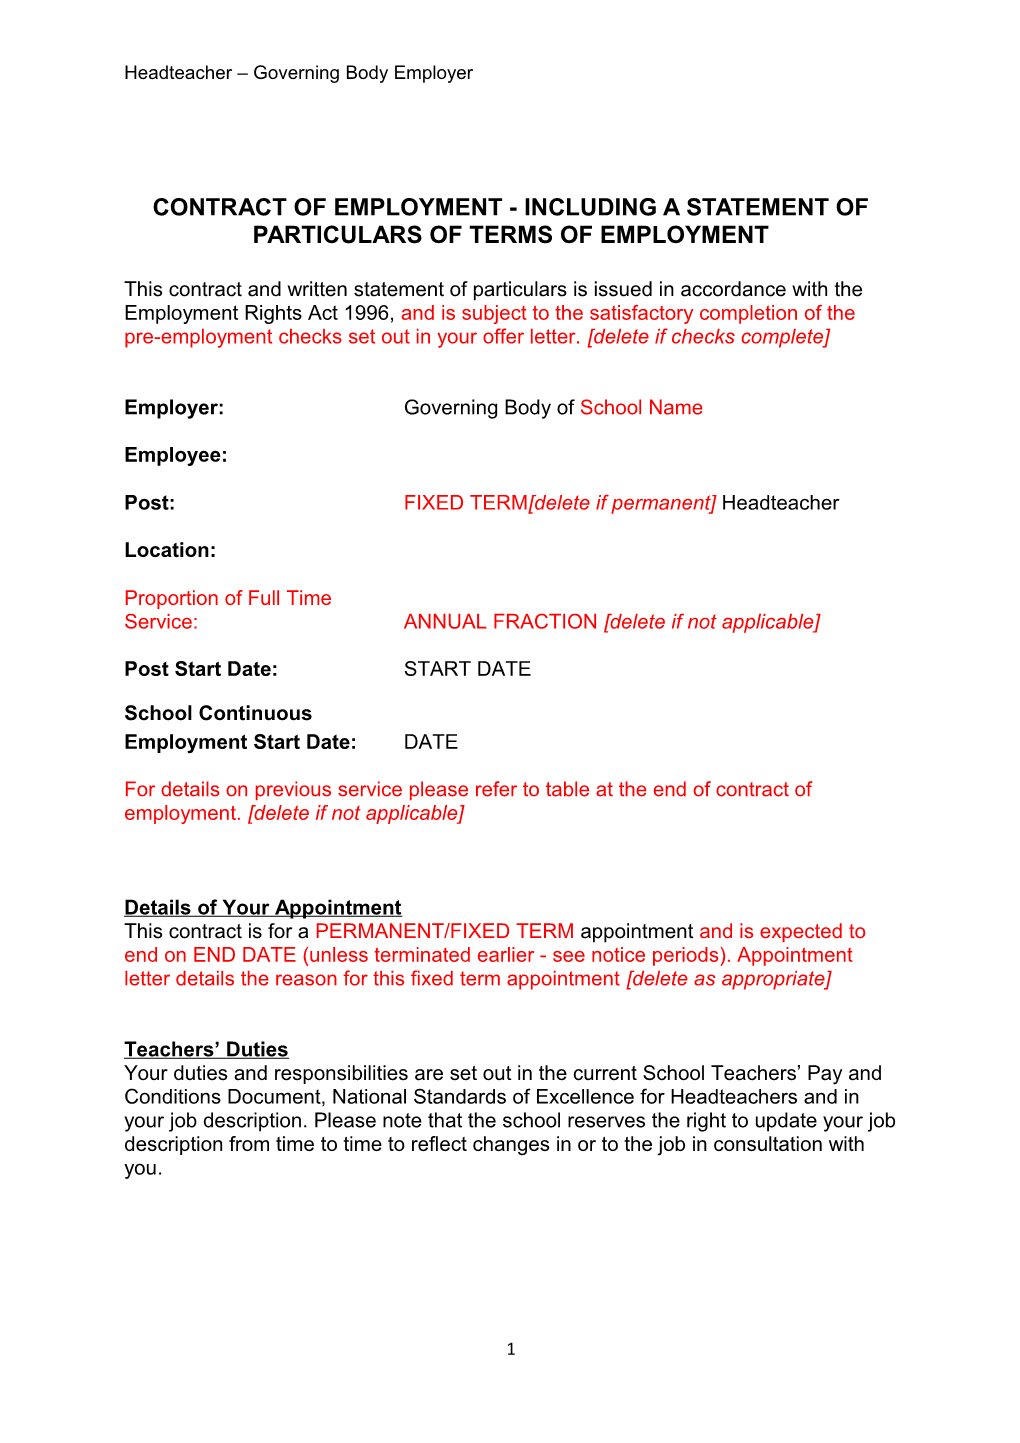 Contract of Employment - Including a Statement of Particulars of Terms of Employment